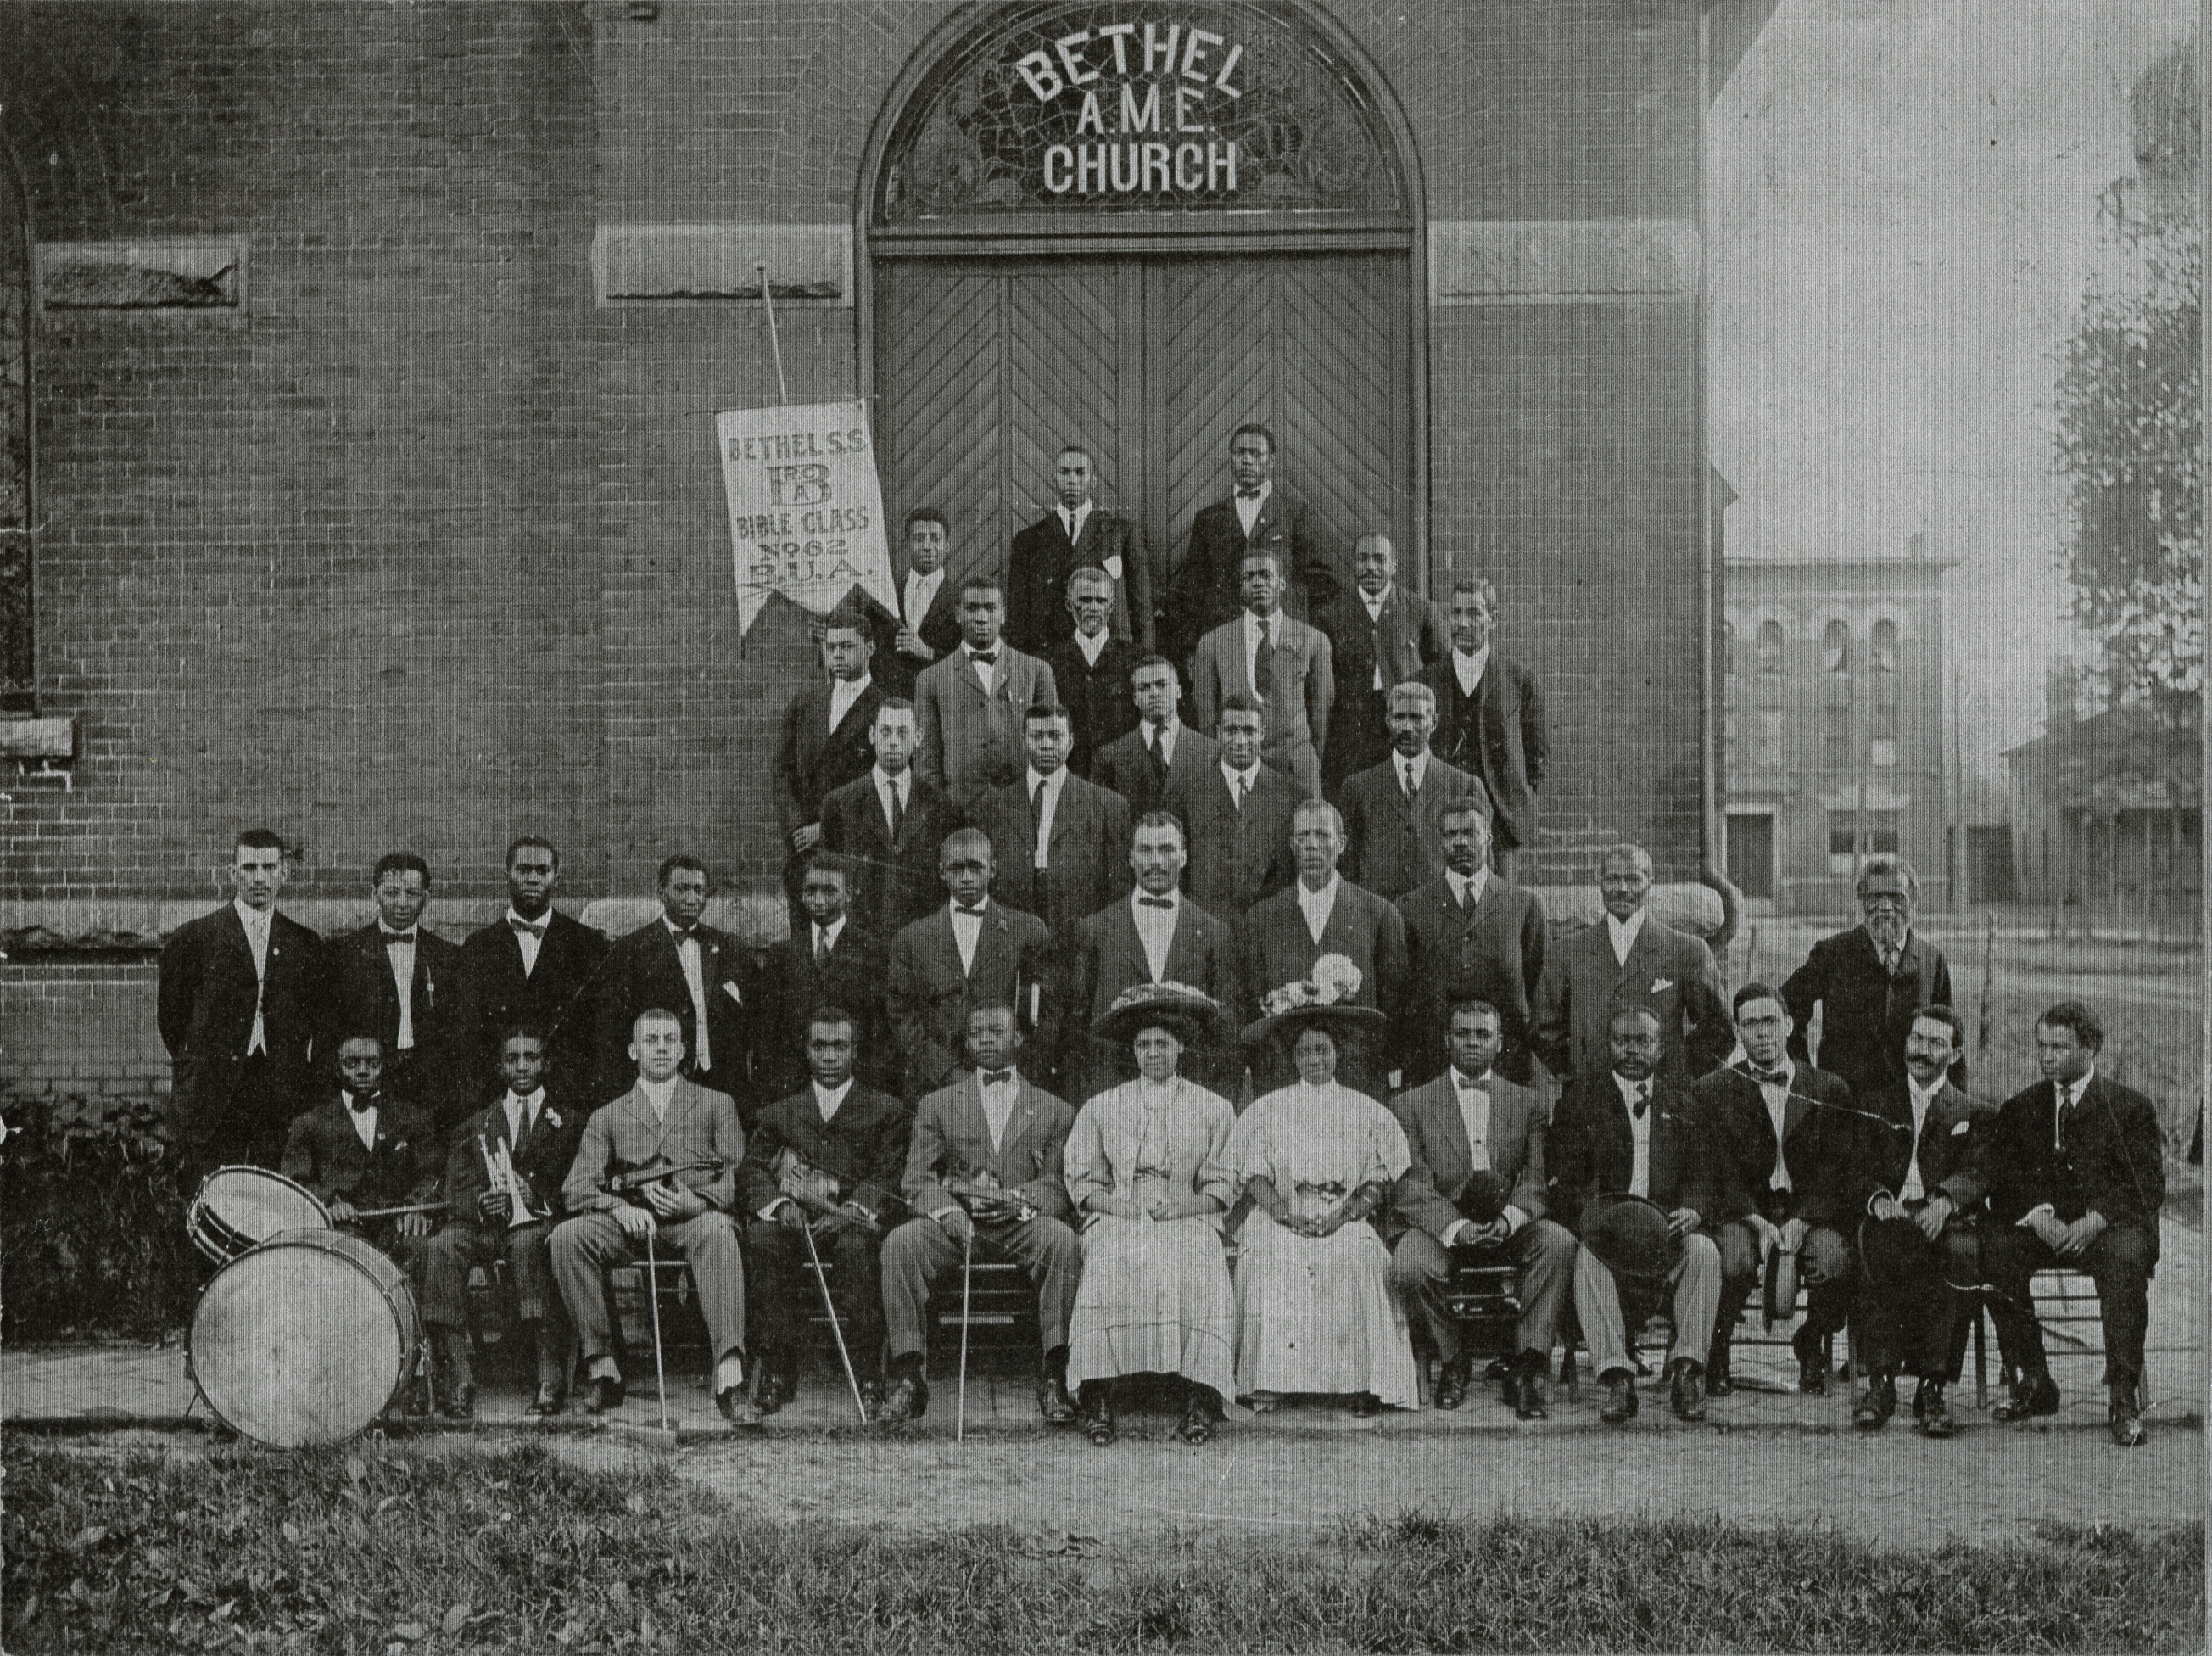 Bethel AME Church group posed on steps including band members, circa 1900